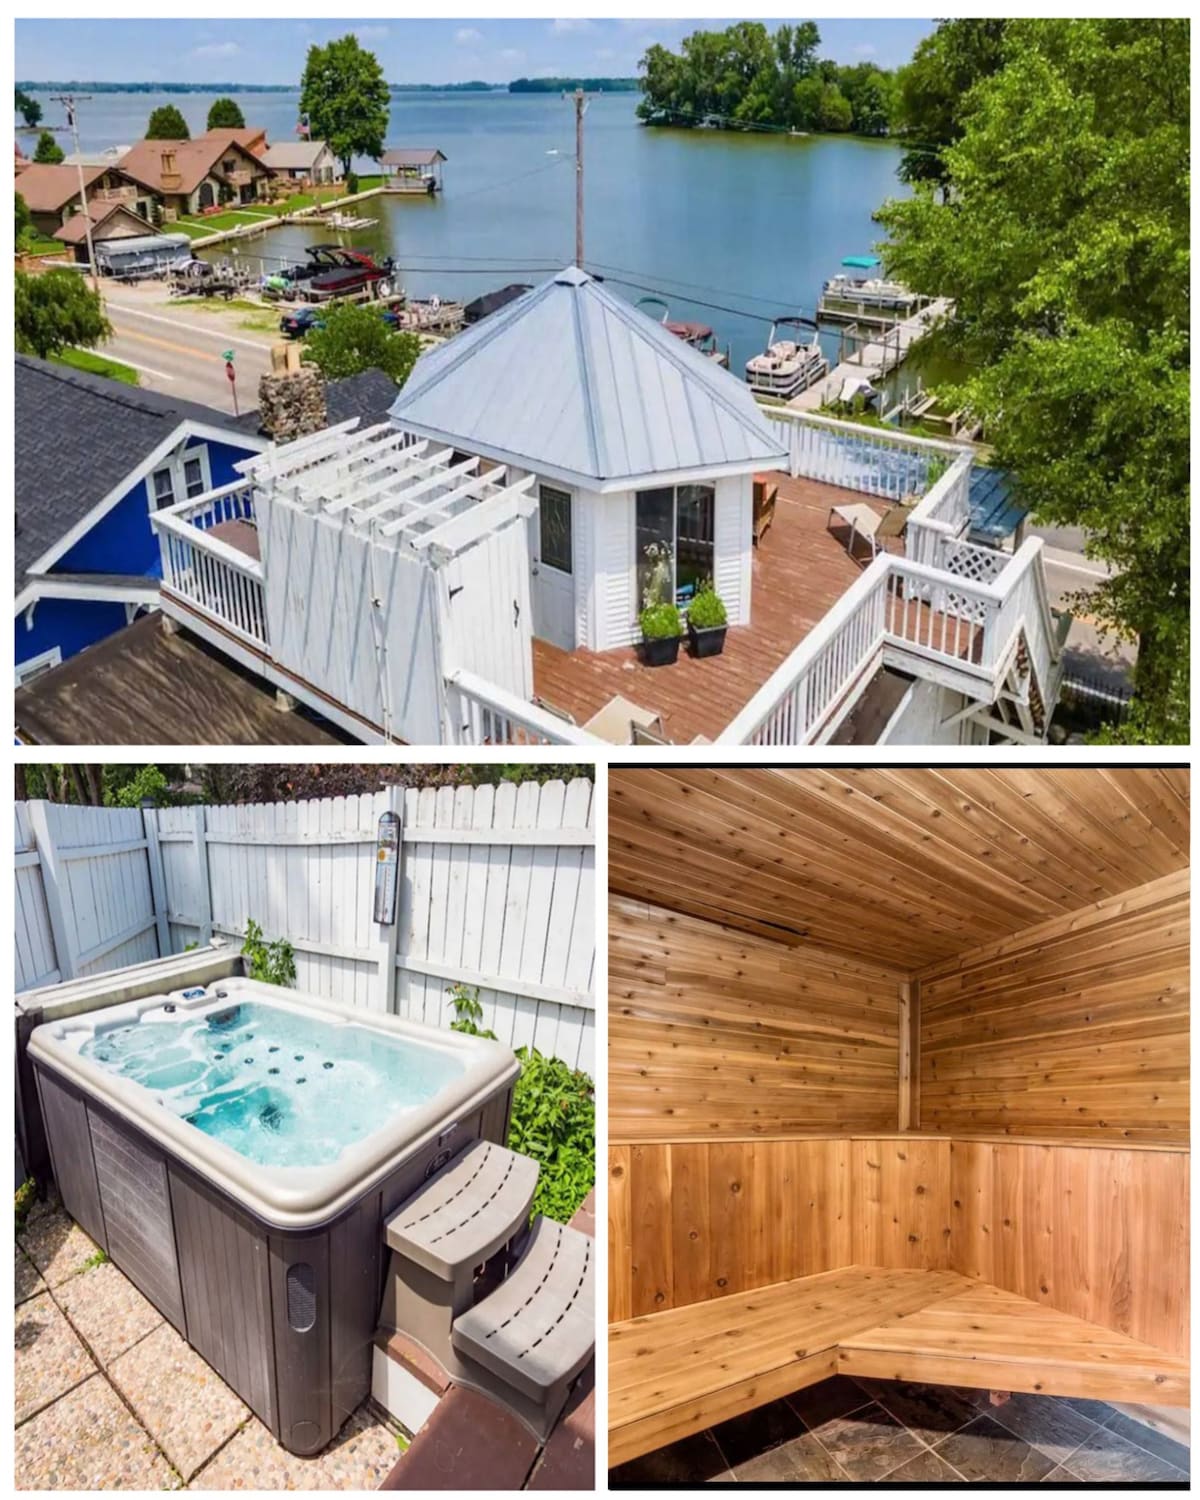 Rooftop Oasis - Hot Tub - Sauna - Steps from Lake!